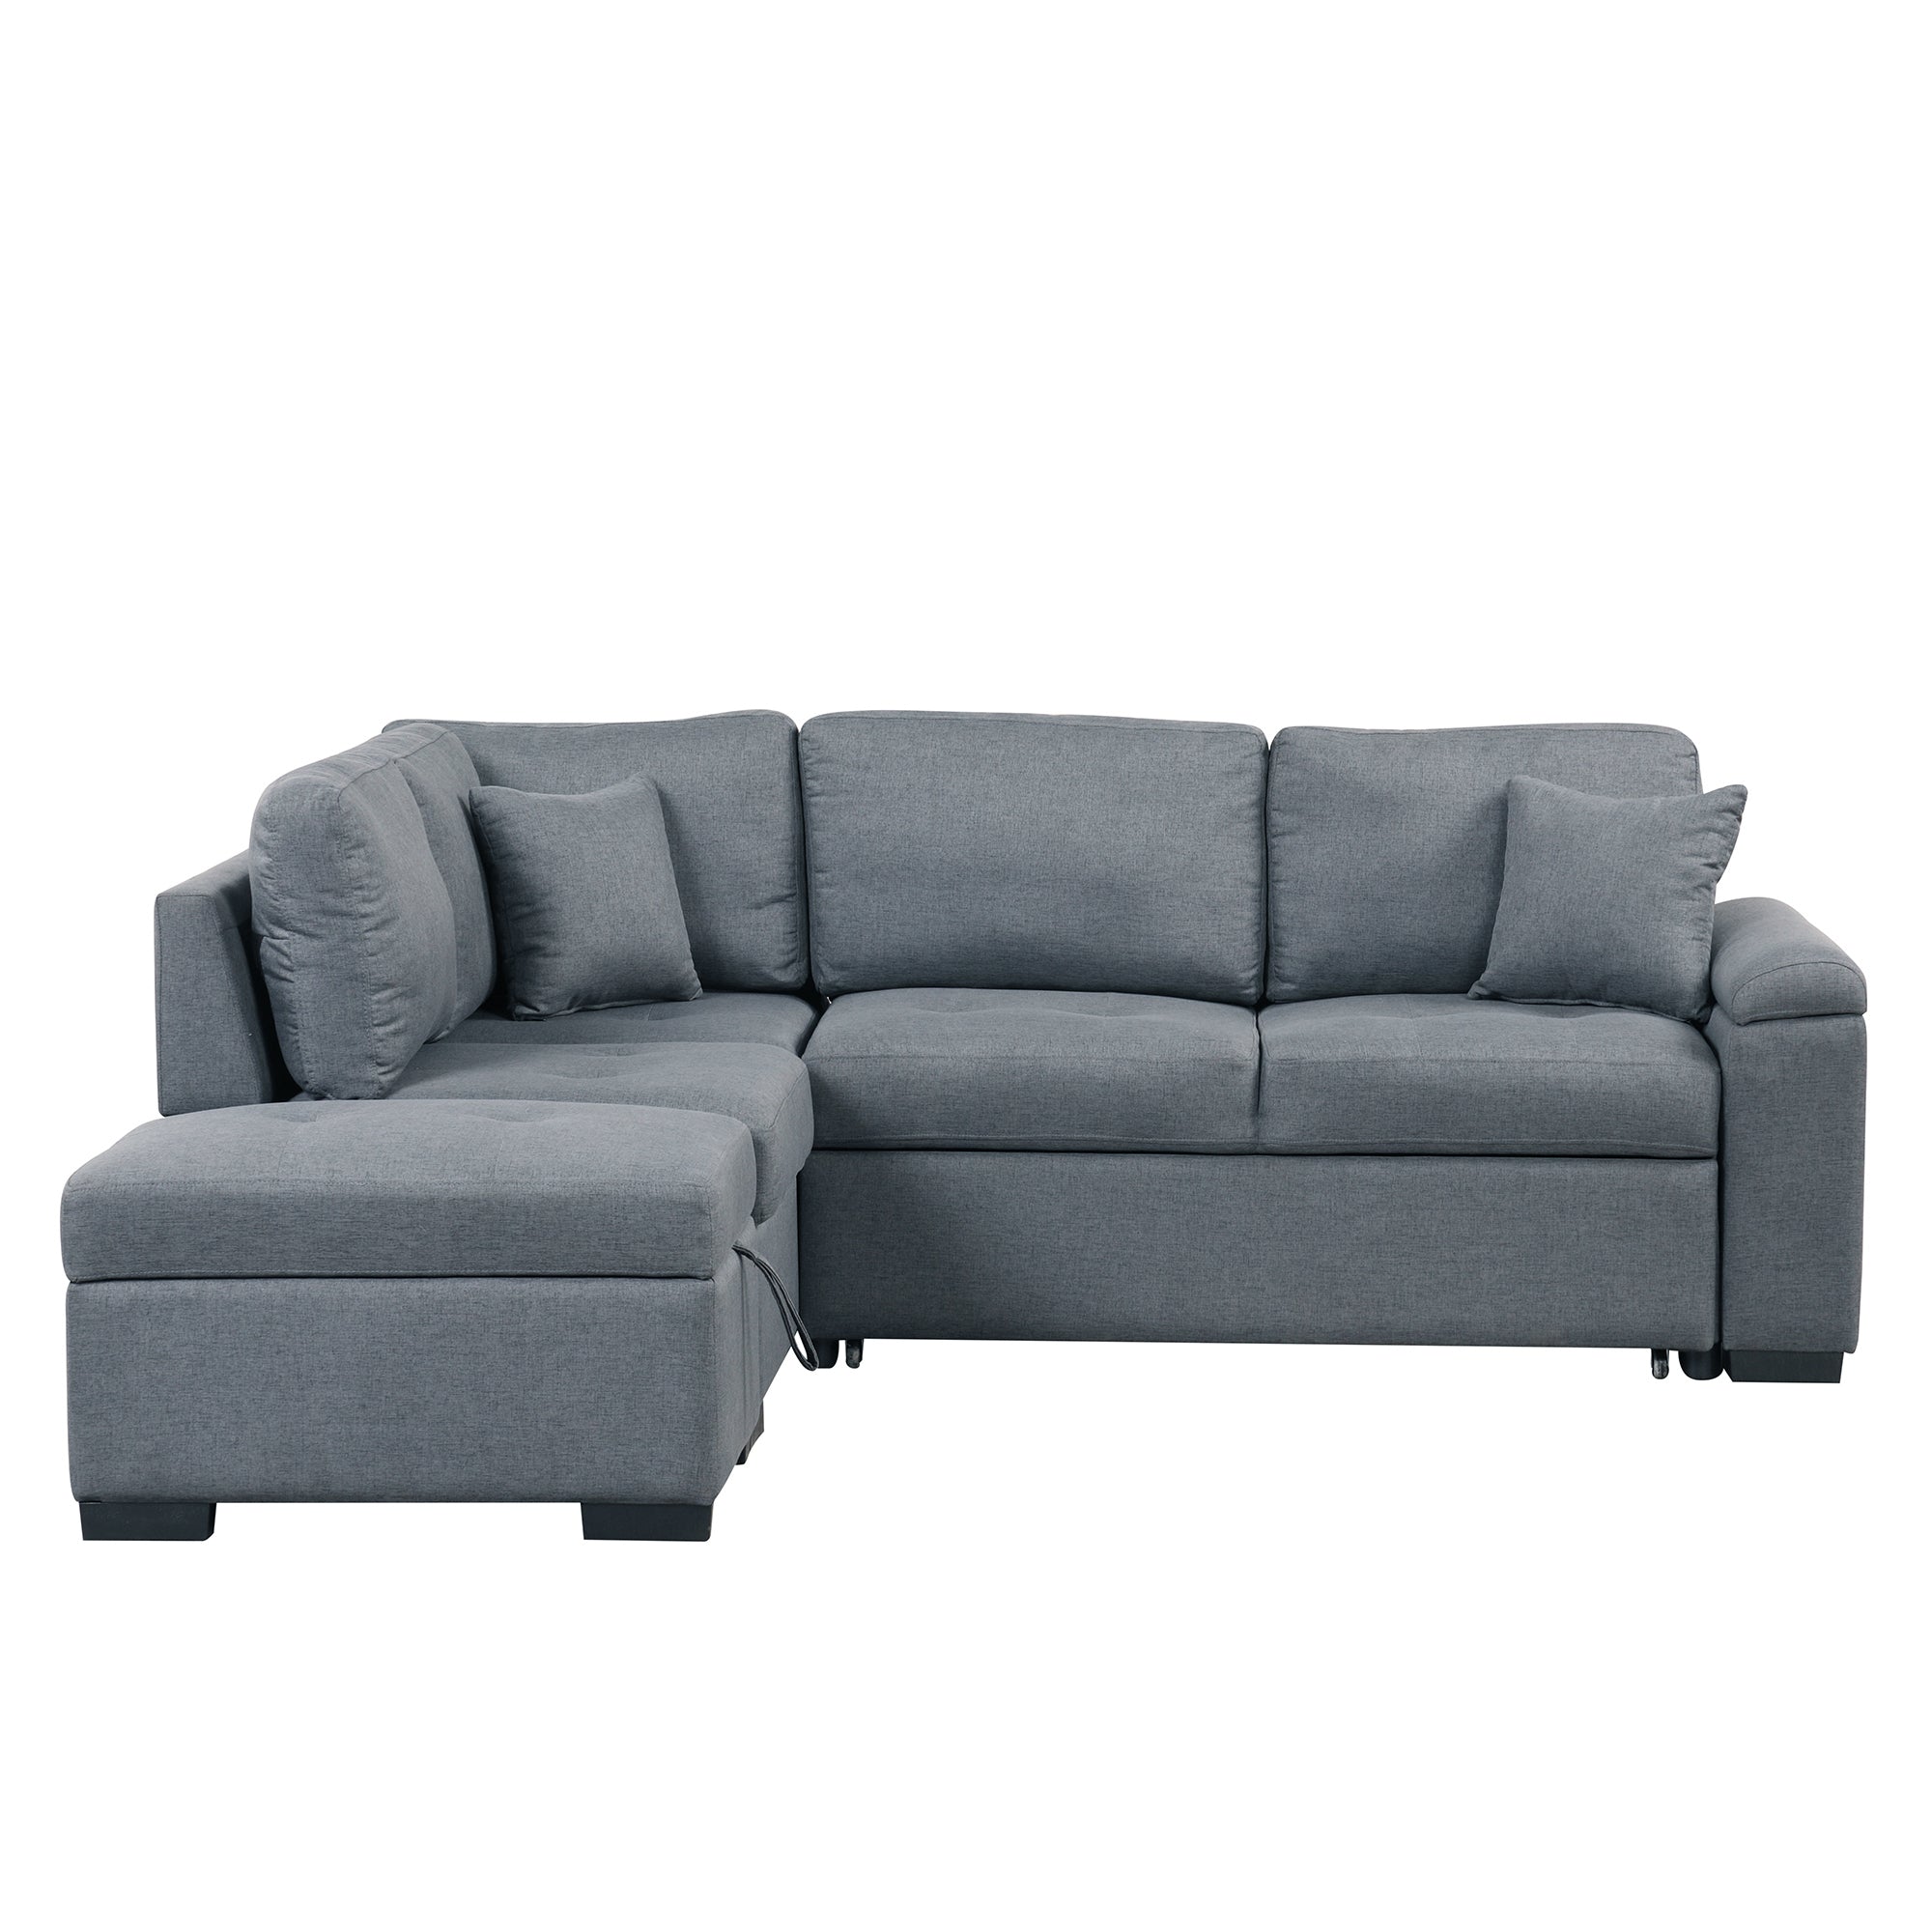 Dark Gray Velvet L Shaped Sleeper Sectional Sofa w/ Storage & USB-Sleeper Sectionals-American Furniture Outlet